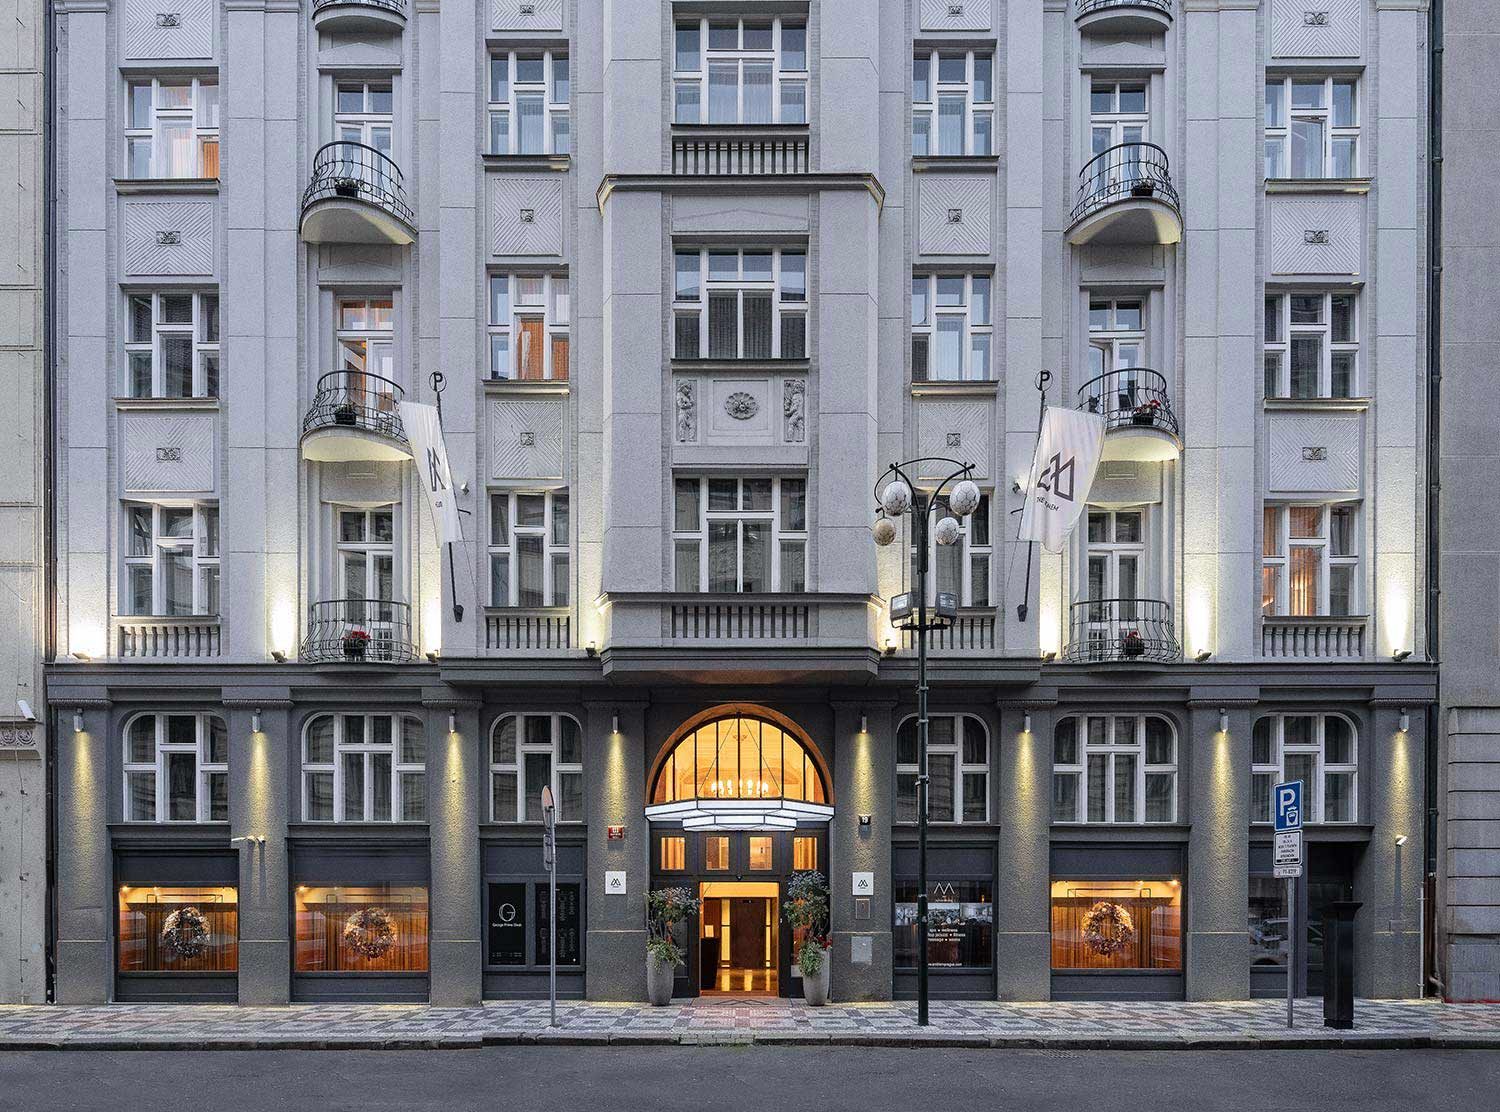 The Emblem Prague A beautifully renovated exterior nestled on a quiet street in the heart of the city center